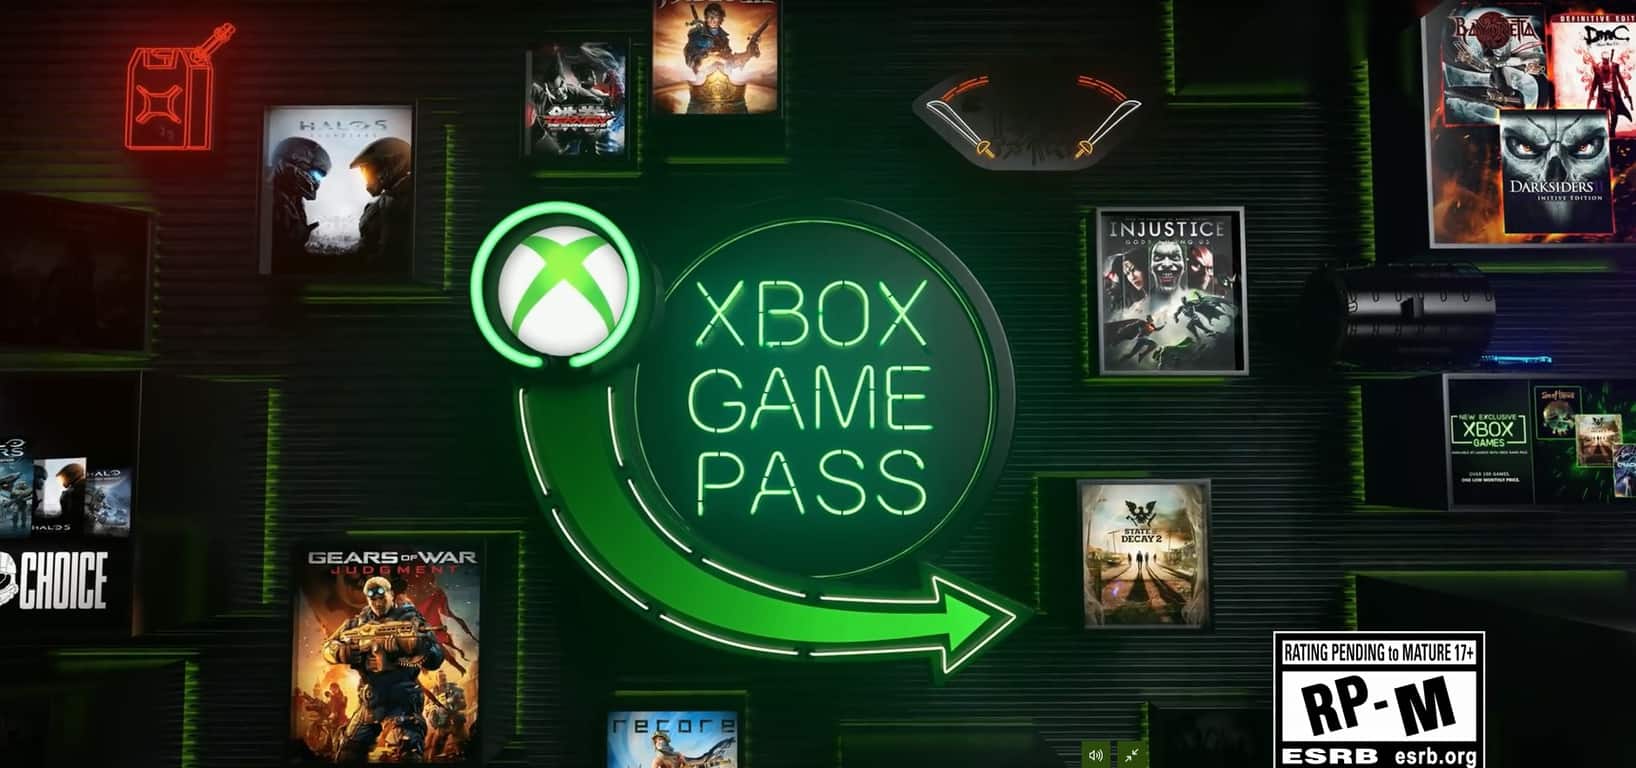 Xbox game pass starting to pay off as gaming revenue had best quarter ever - onmsft. Com - january 31, 2019